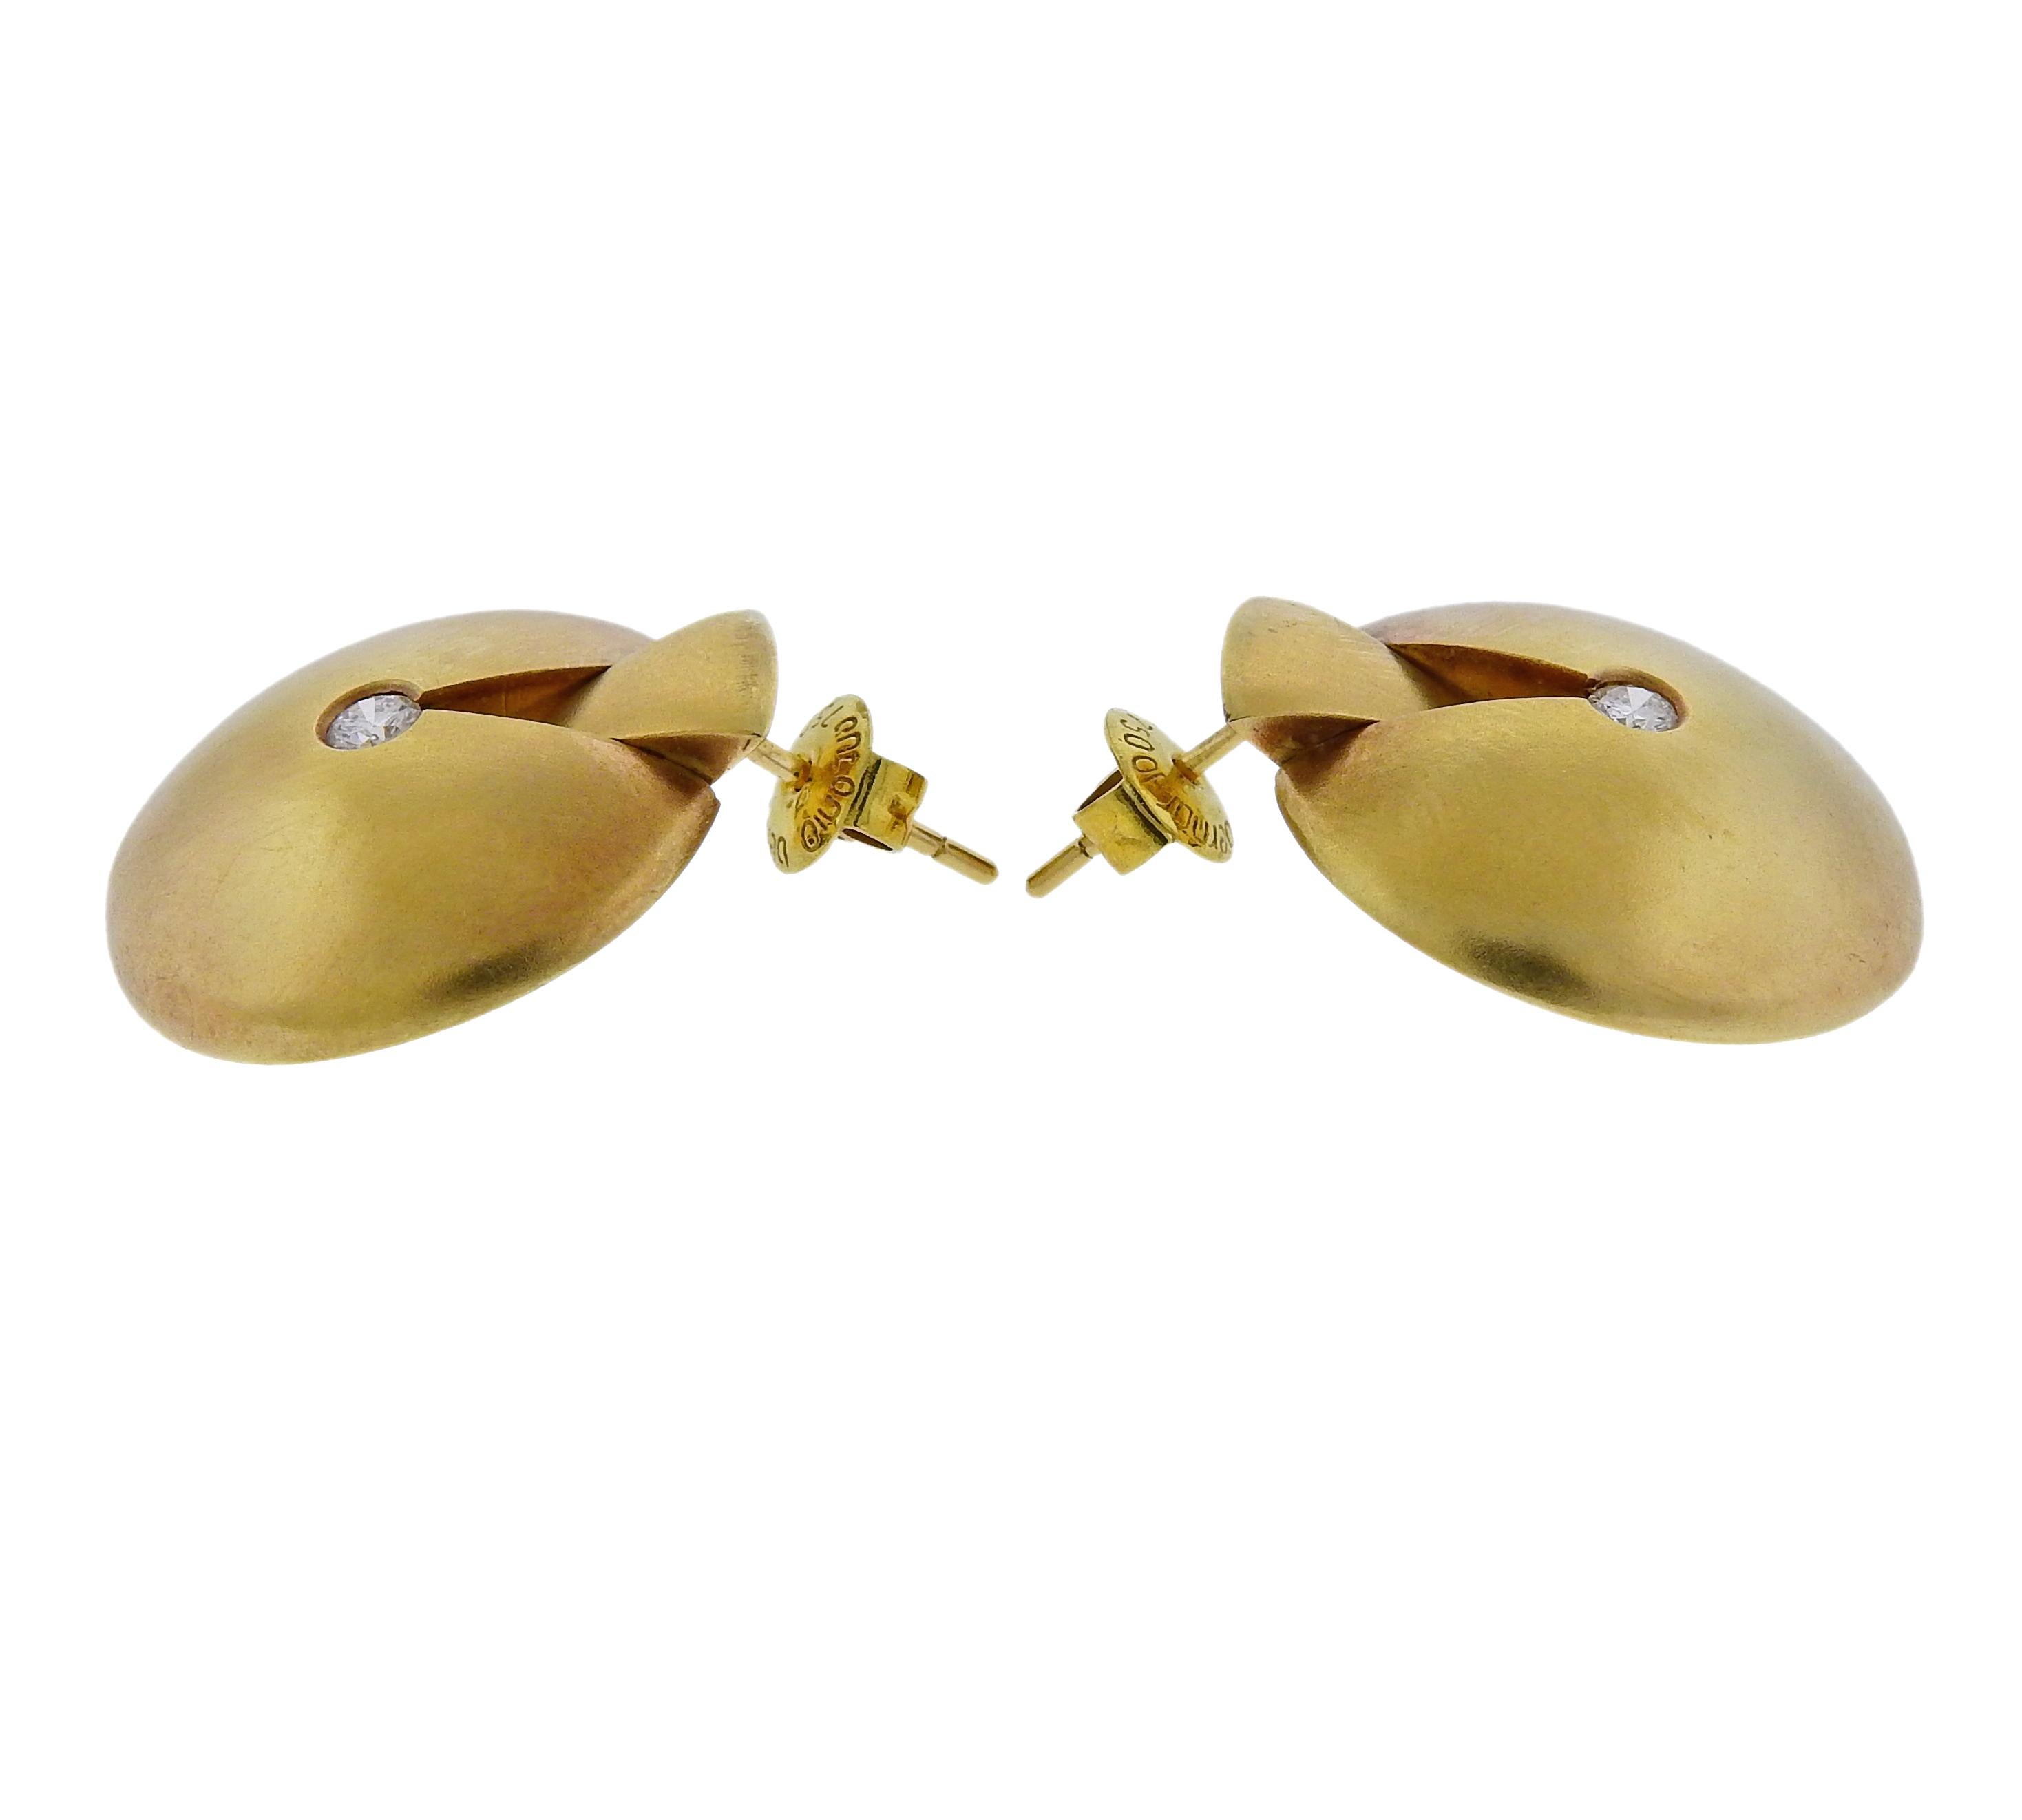 18k yellow gold earrings by Antonio Bernardo, adorned with approx. 0.20ctw in H/VS diamonds.  Earrings are 23mm x 21mm and weigh 12 grams. Marked Maker's Mark 750. 